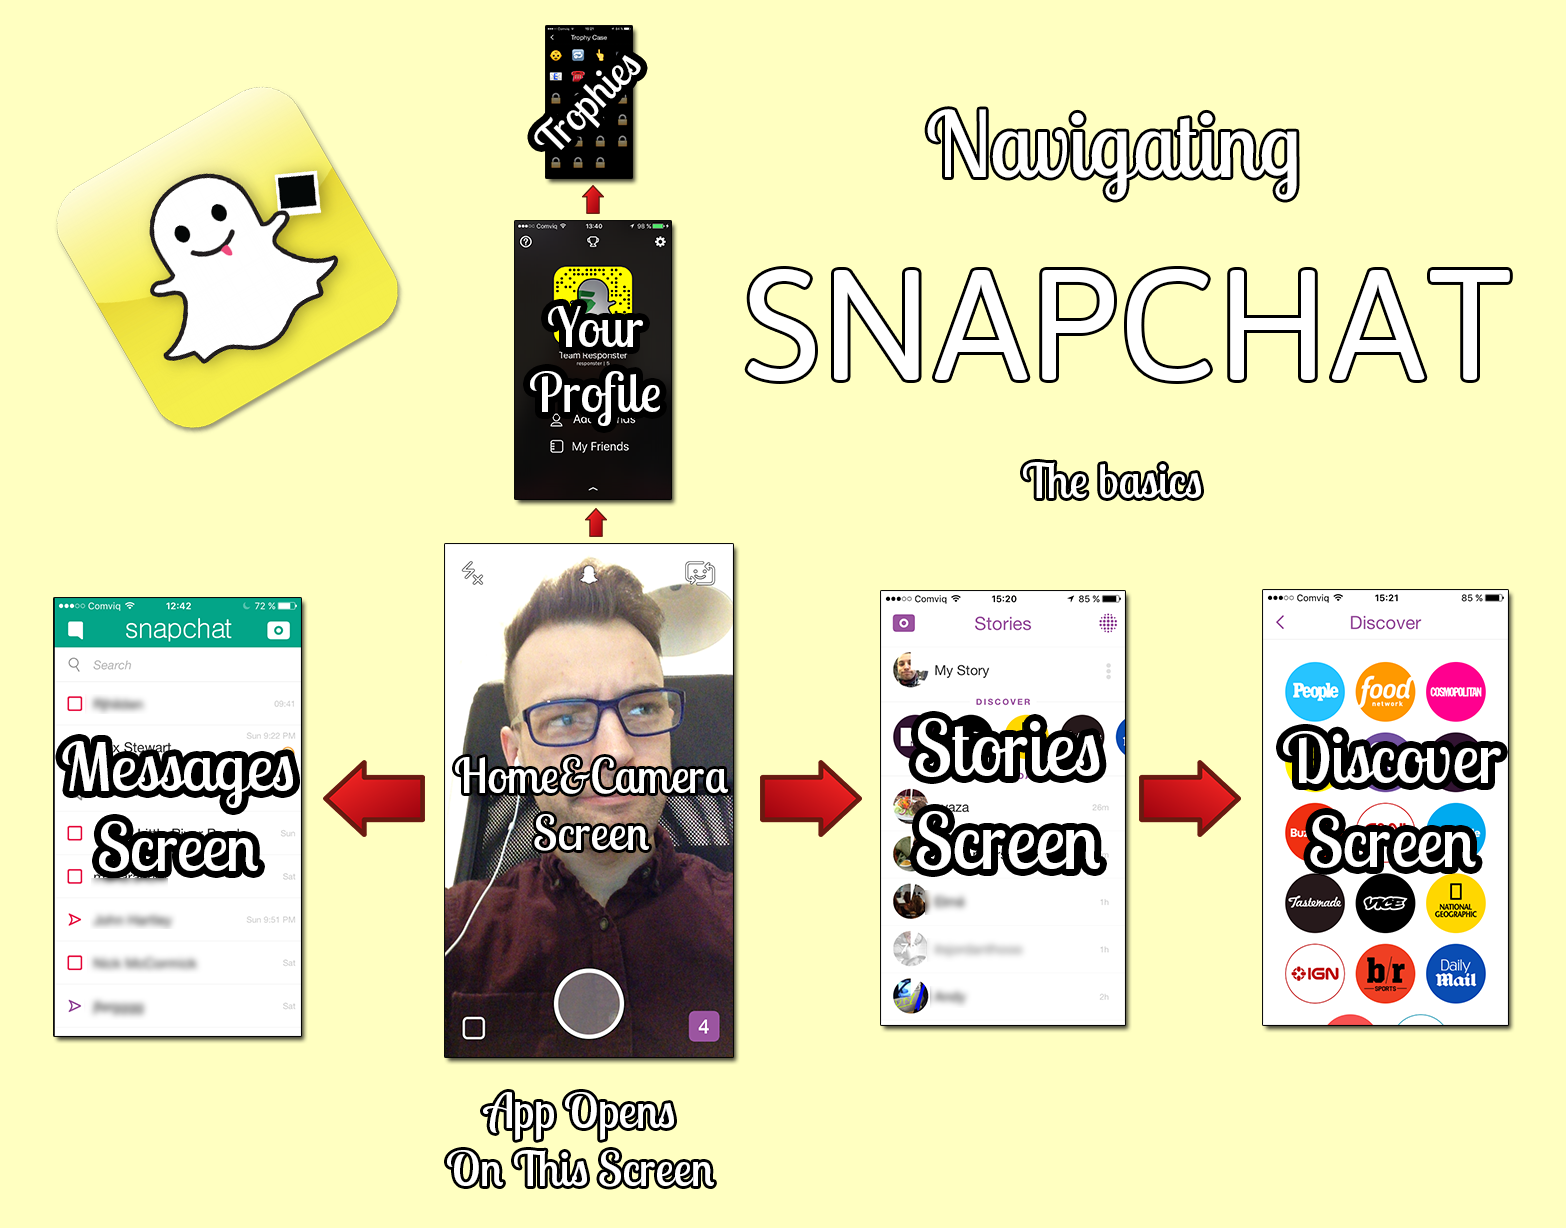 How to navigate snapchat